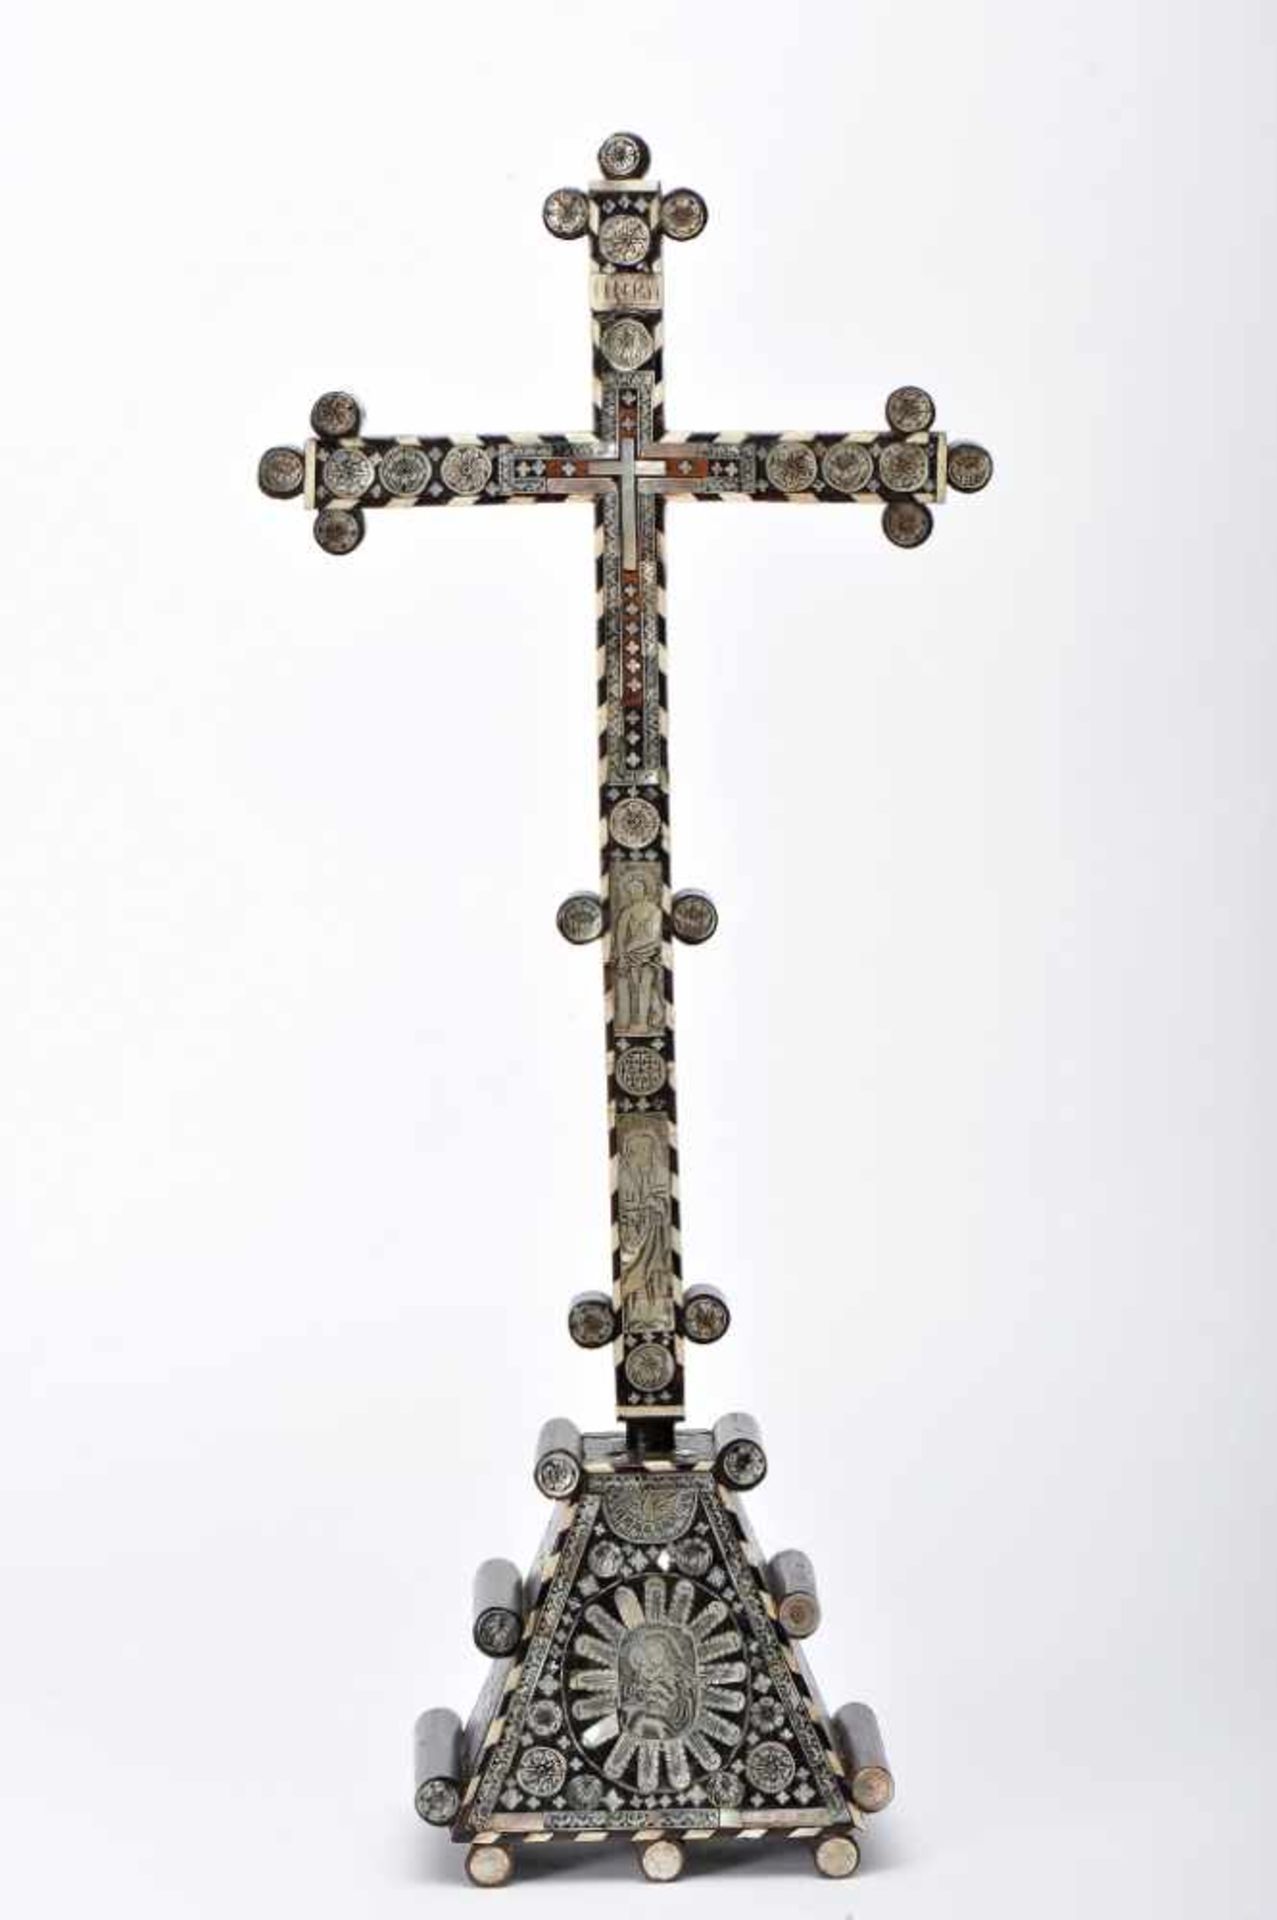 A CrucifixA Crucifix, olive wood coated with engraved mother-of-pearl plaques with backgrounds